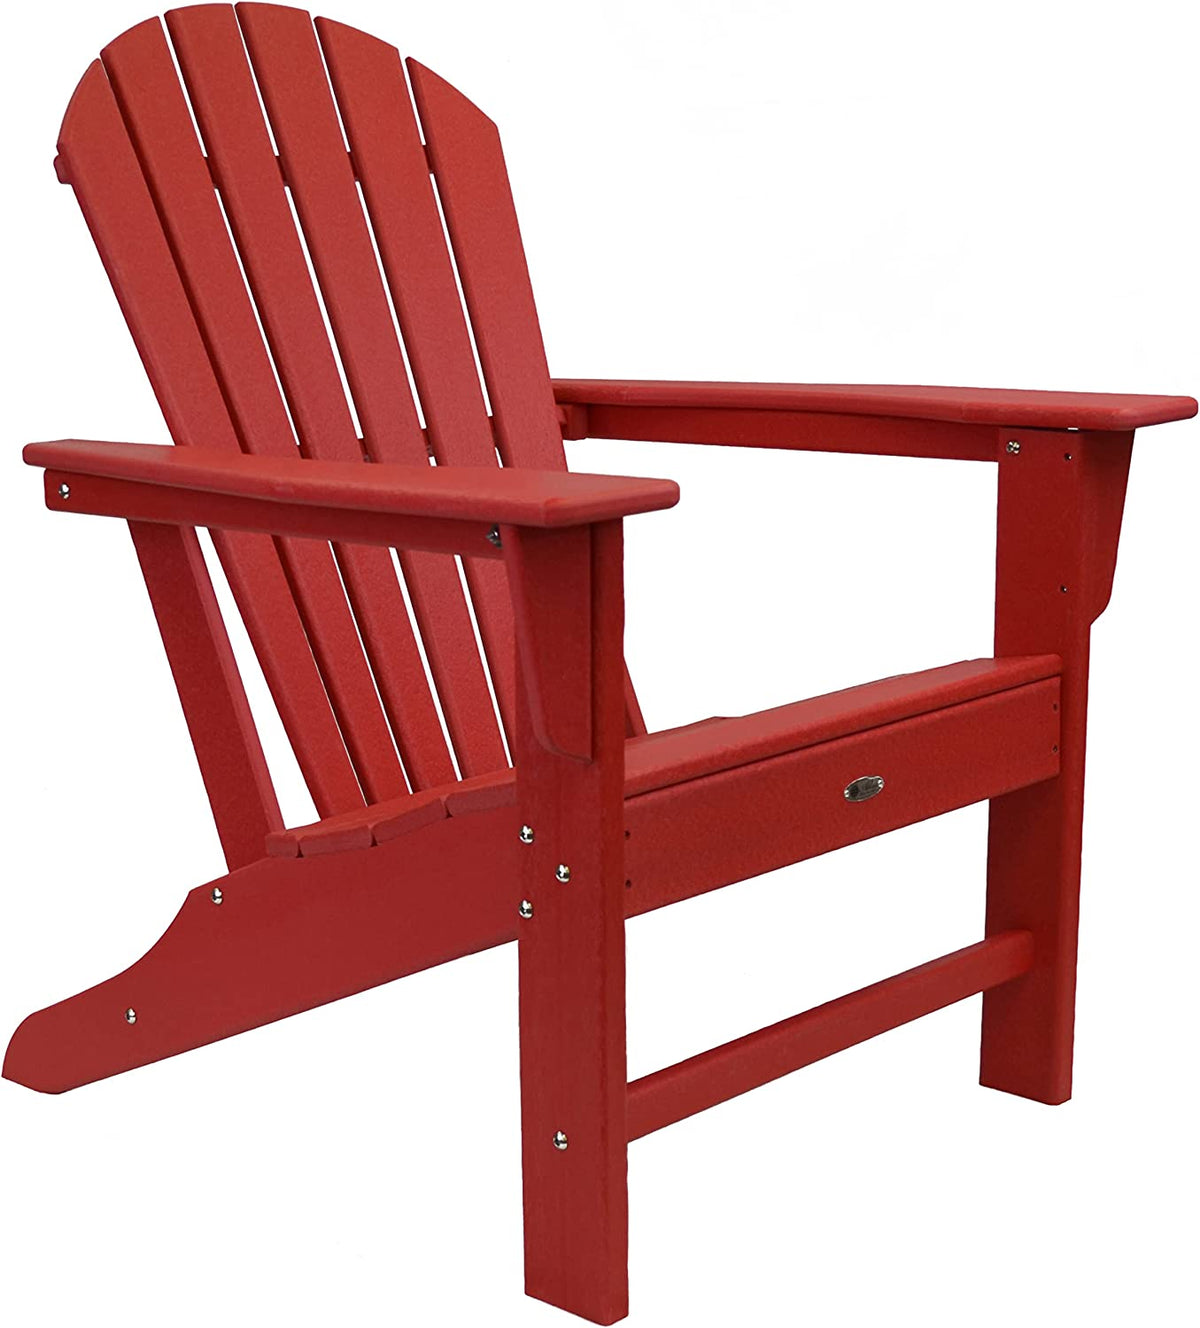 Adirondack Chair by Atlas, Surf City - Red